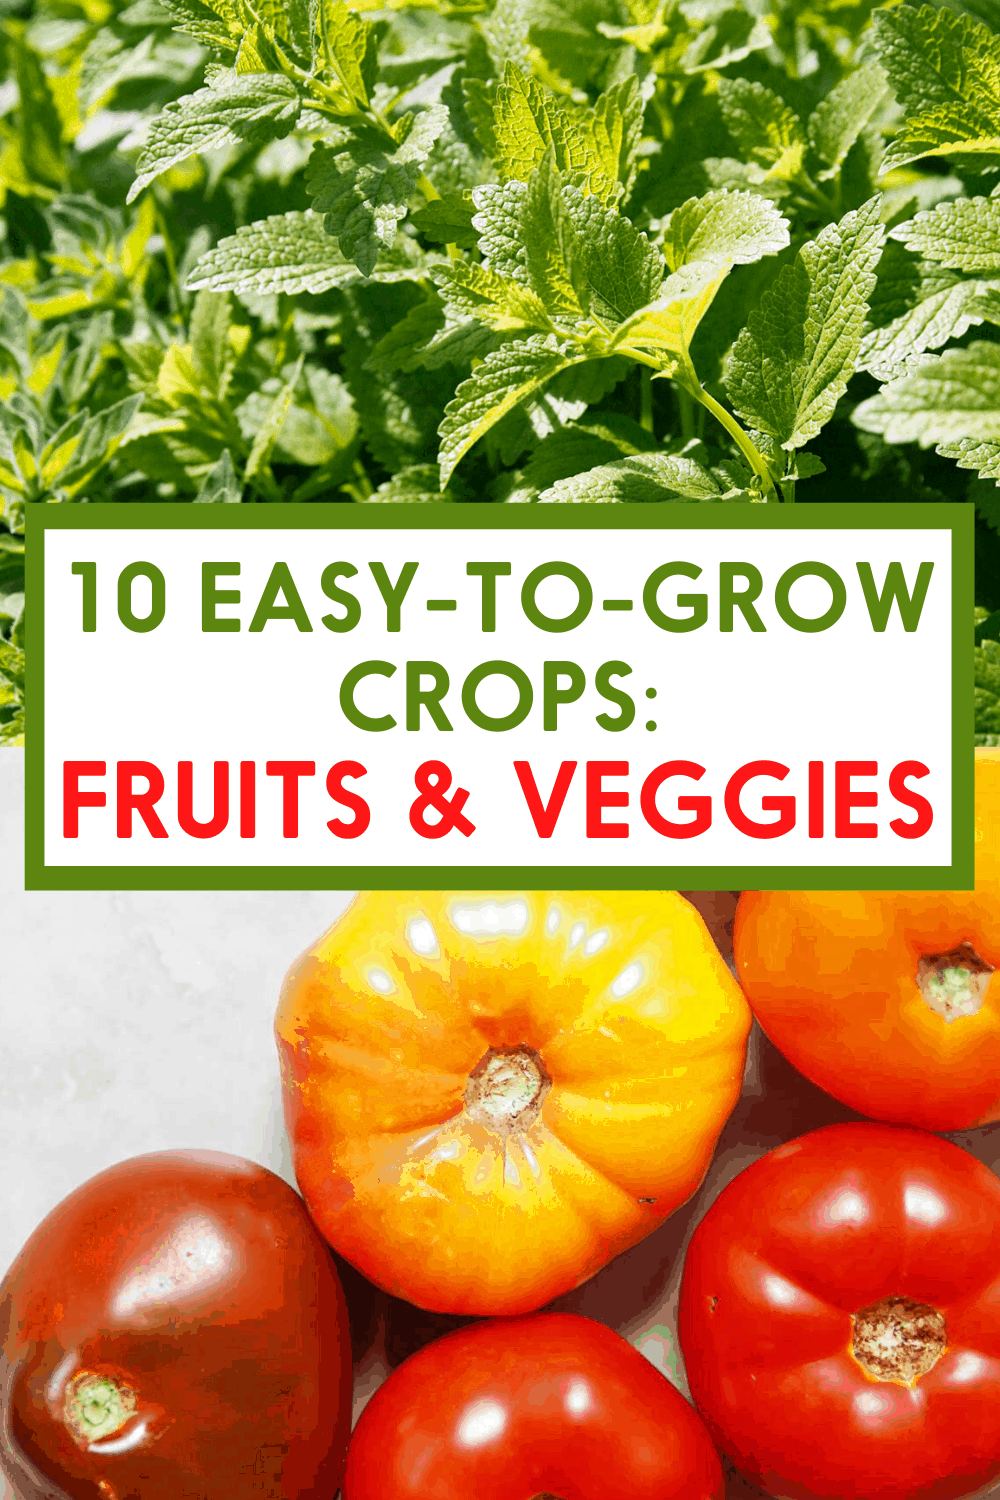 10 Easy Fruit and Vegetables to Grow